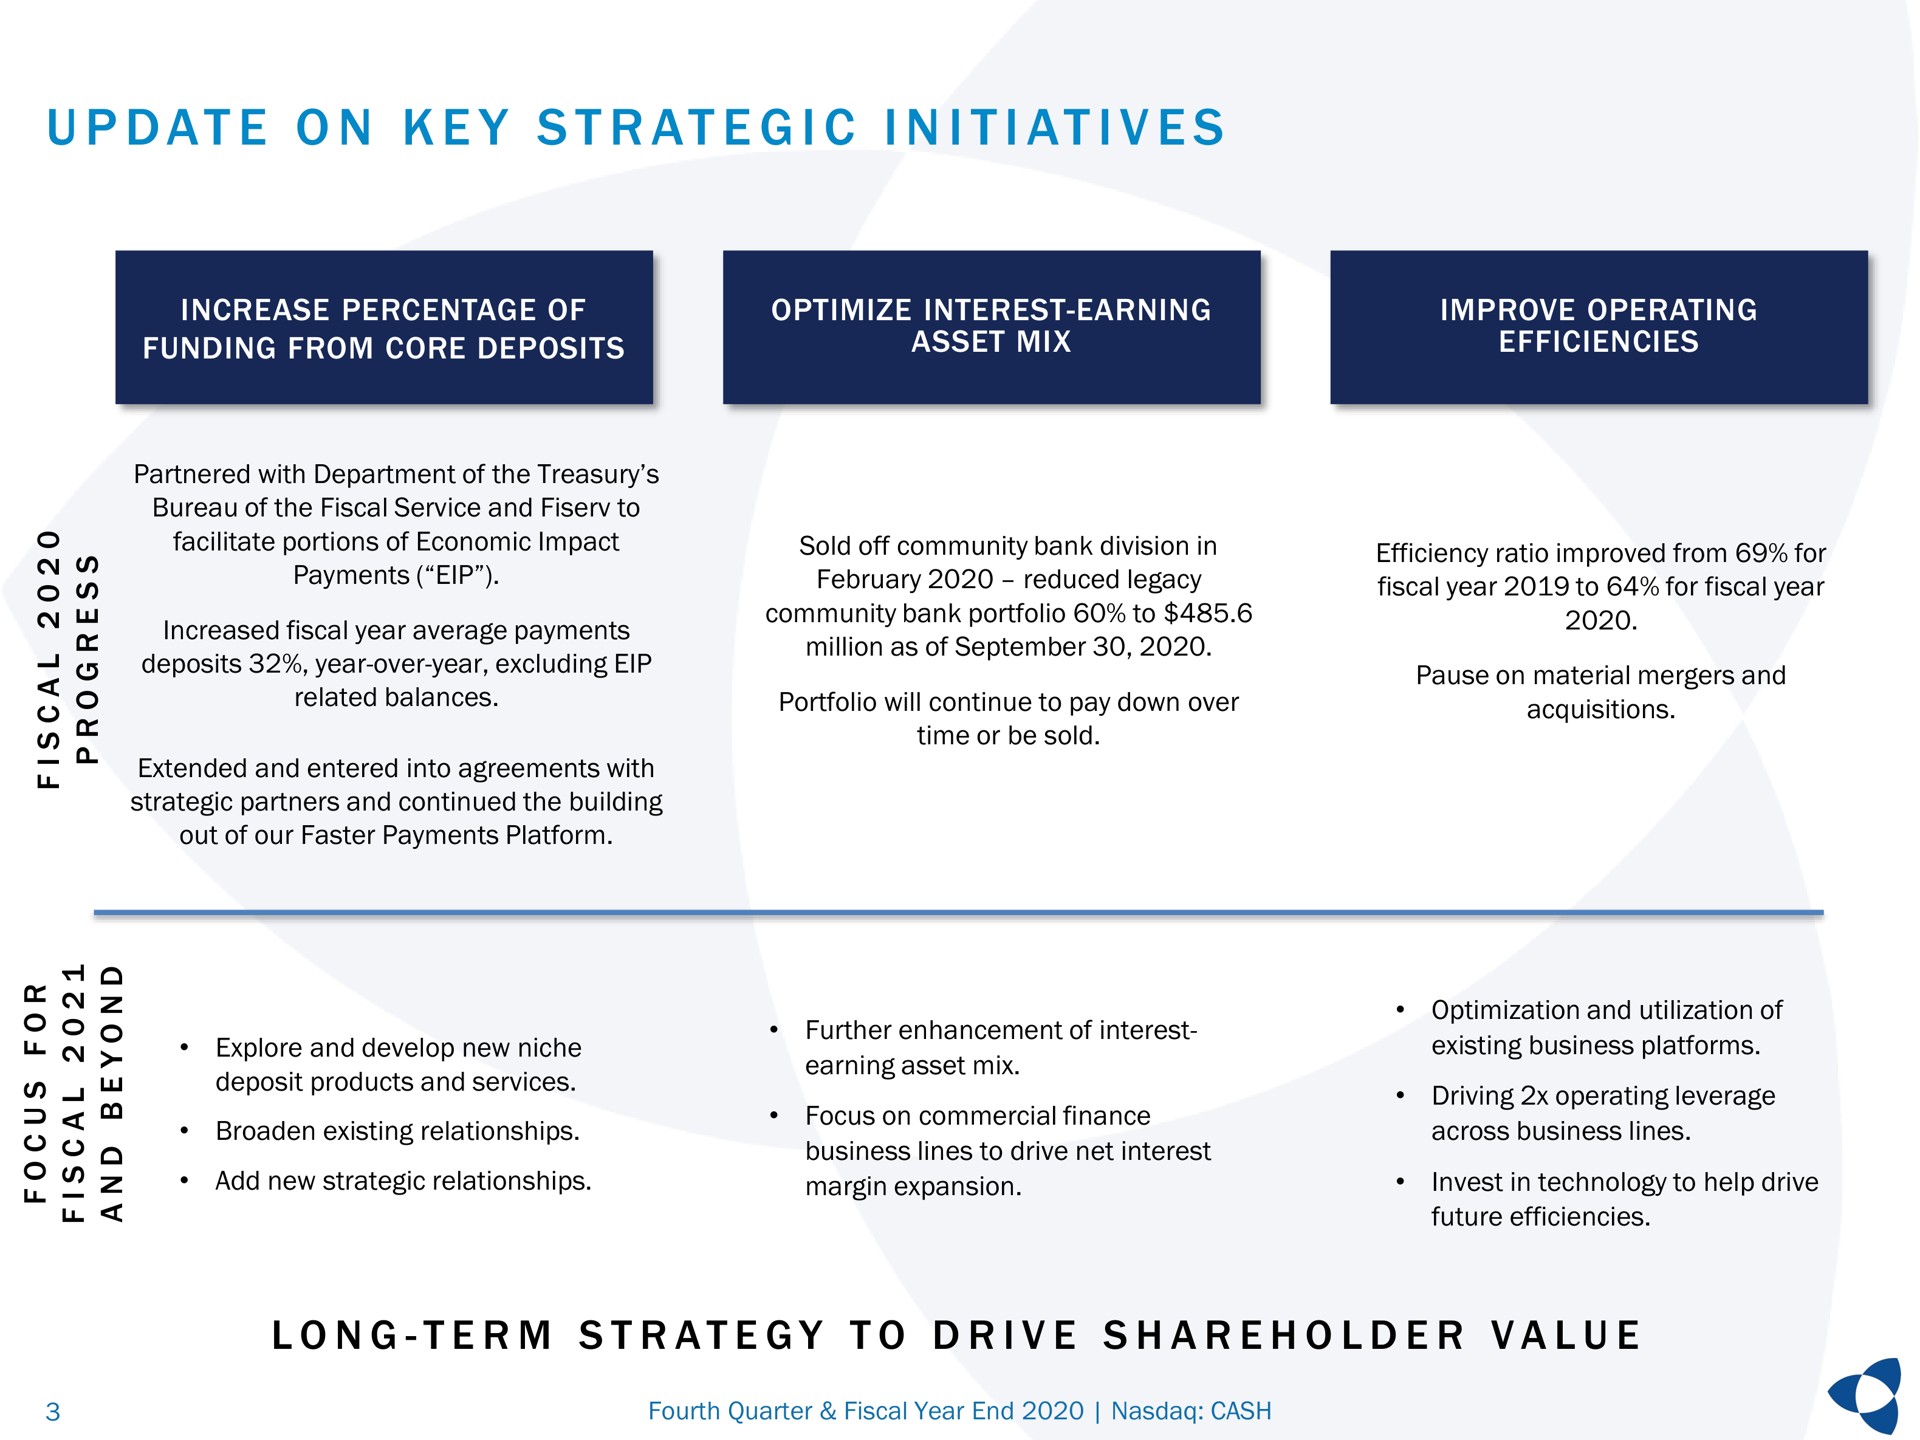 at at i i i i at i a i a a update on key strategic initiatives funding from core deposits asset mix efficiencies long term strategy to drive shareholder value | Pathward Financial